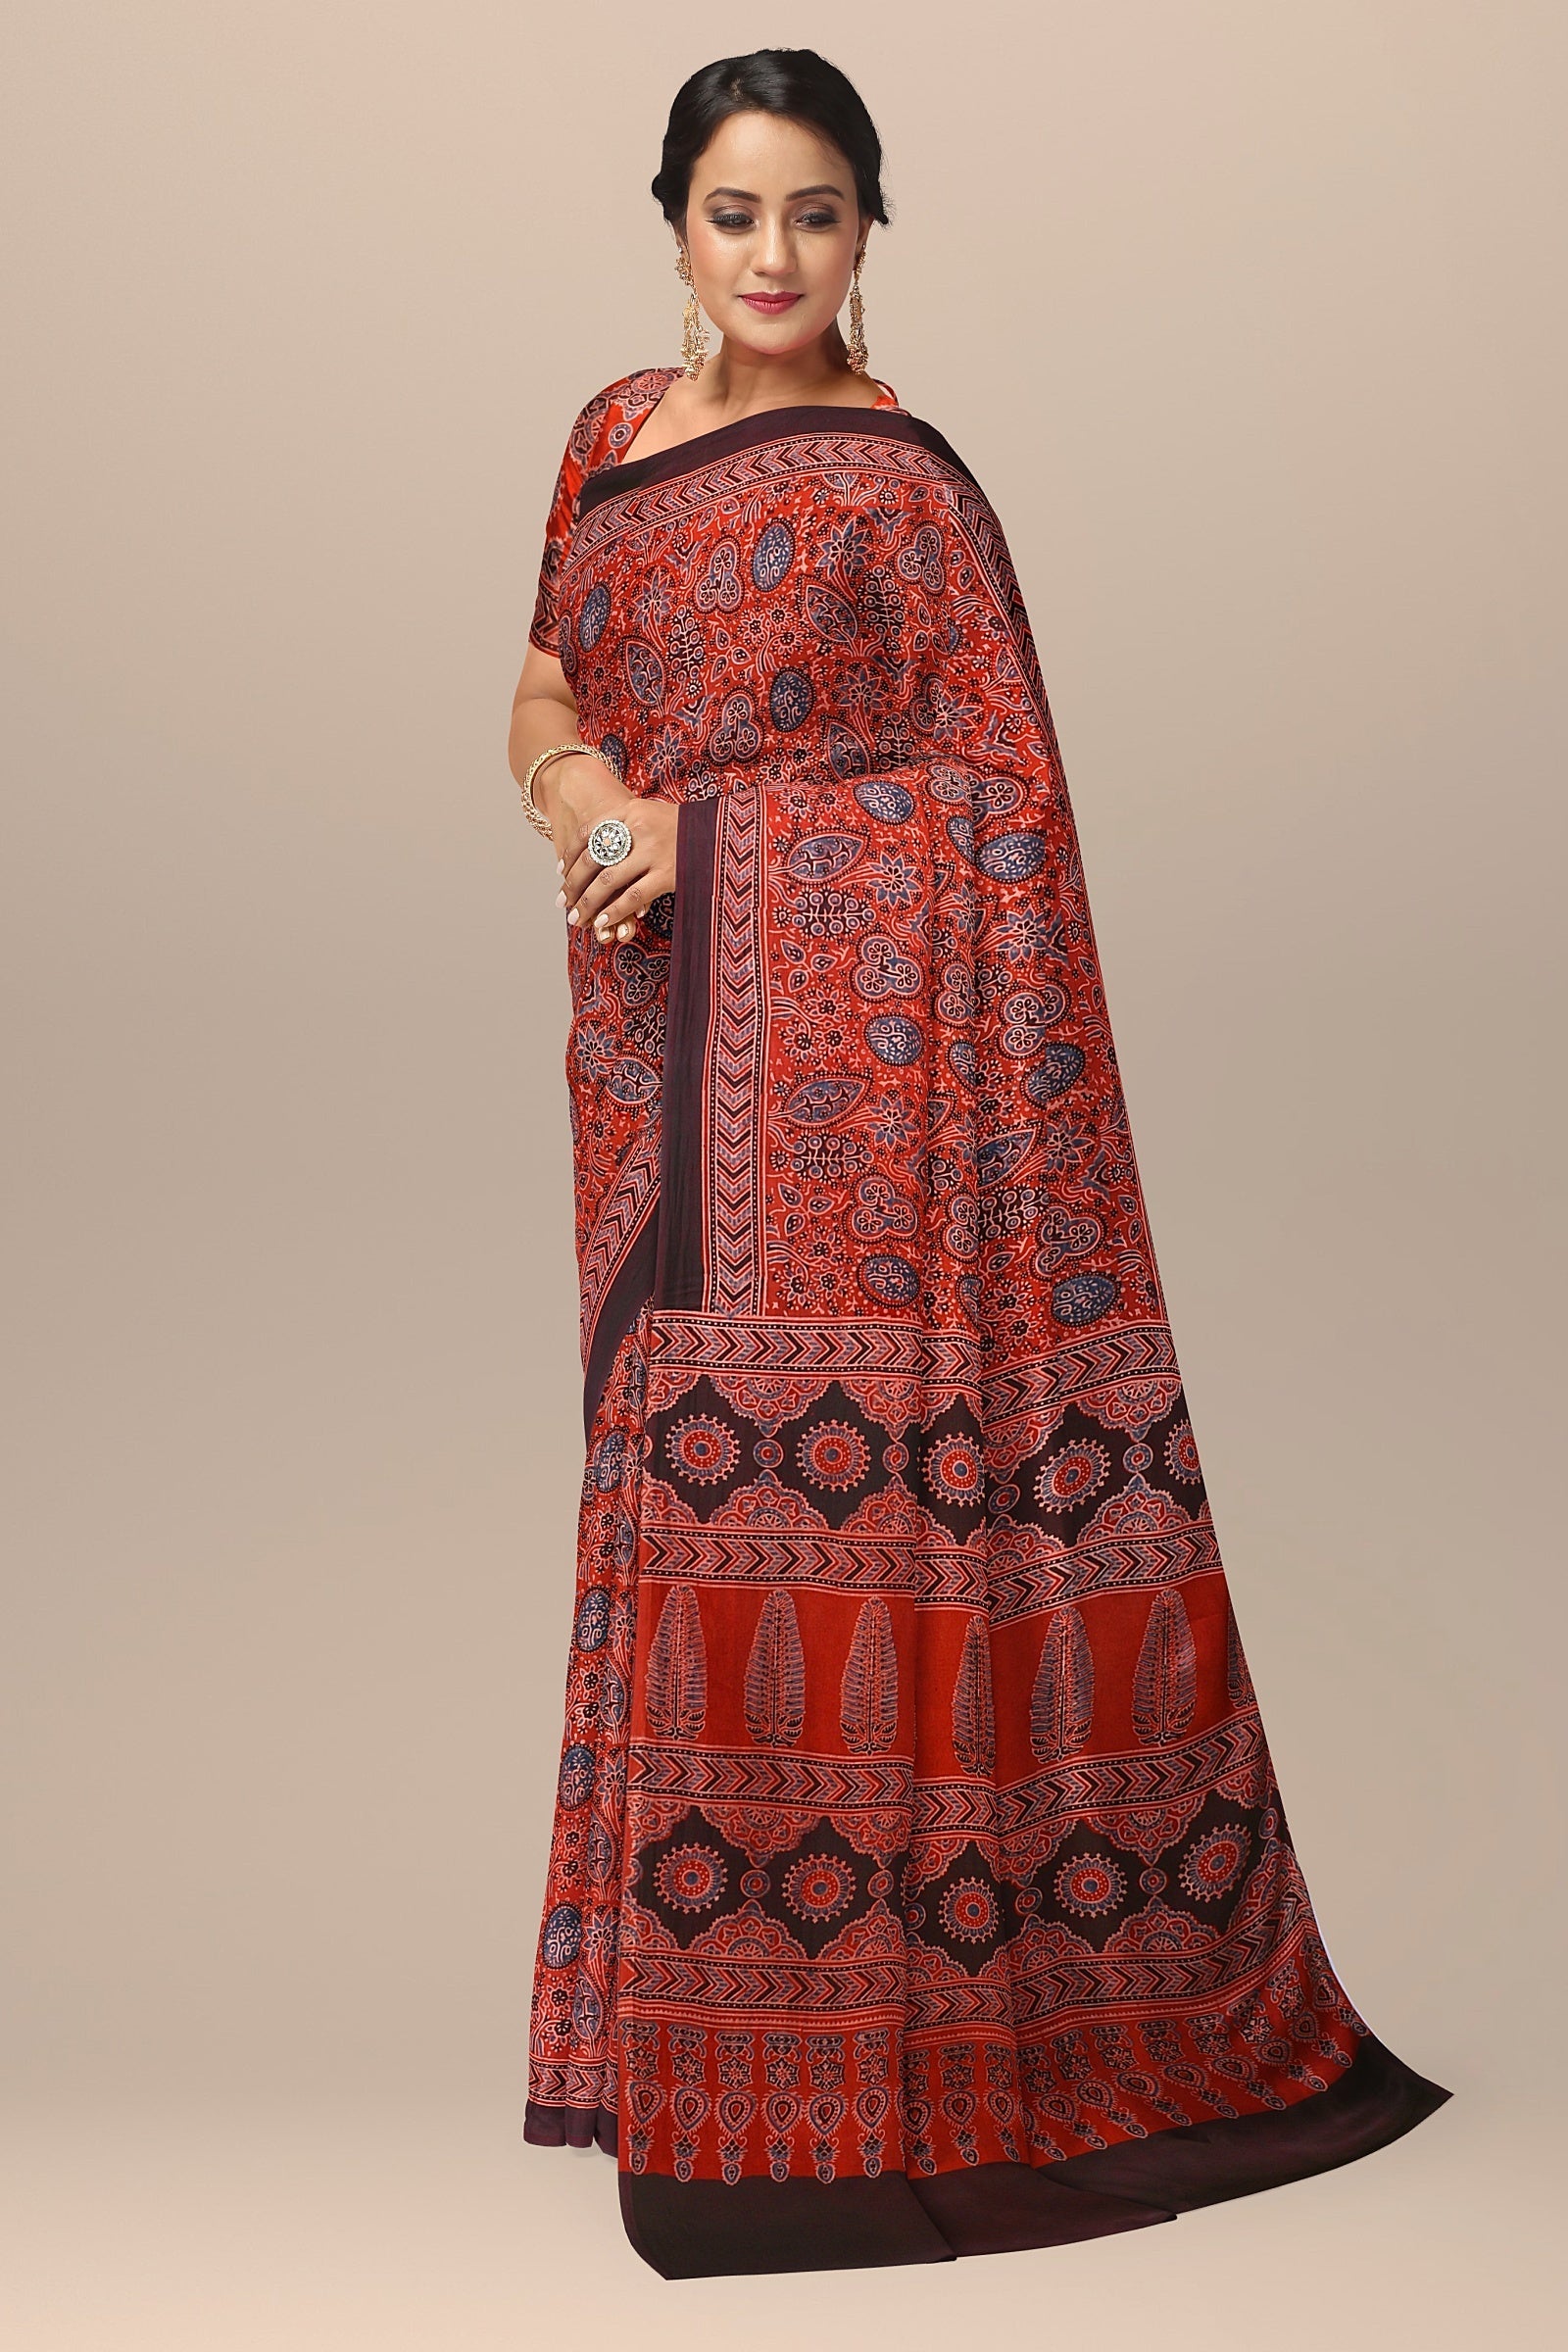 Black Color Traditional Blue and Red Floral and Geometrical Ajrakh Print Modal Silk Saree  SKU-BS10071 - Bhartiya Shilp